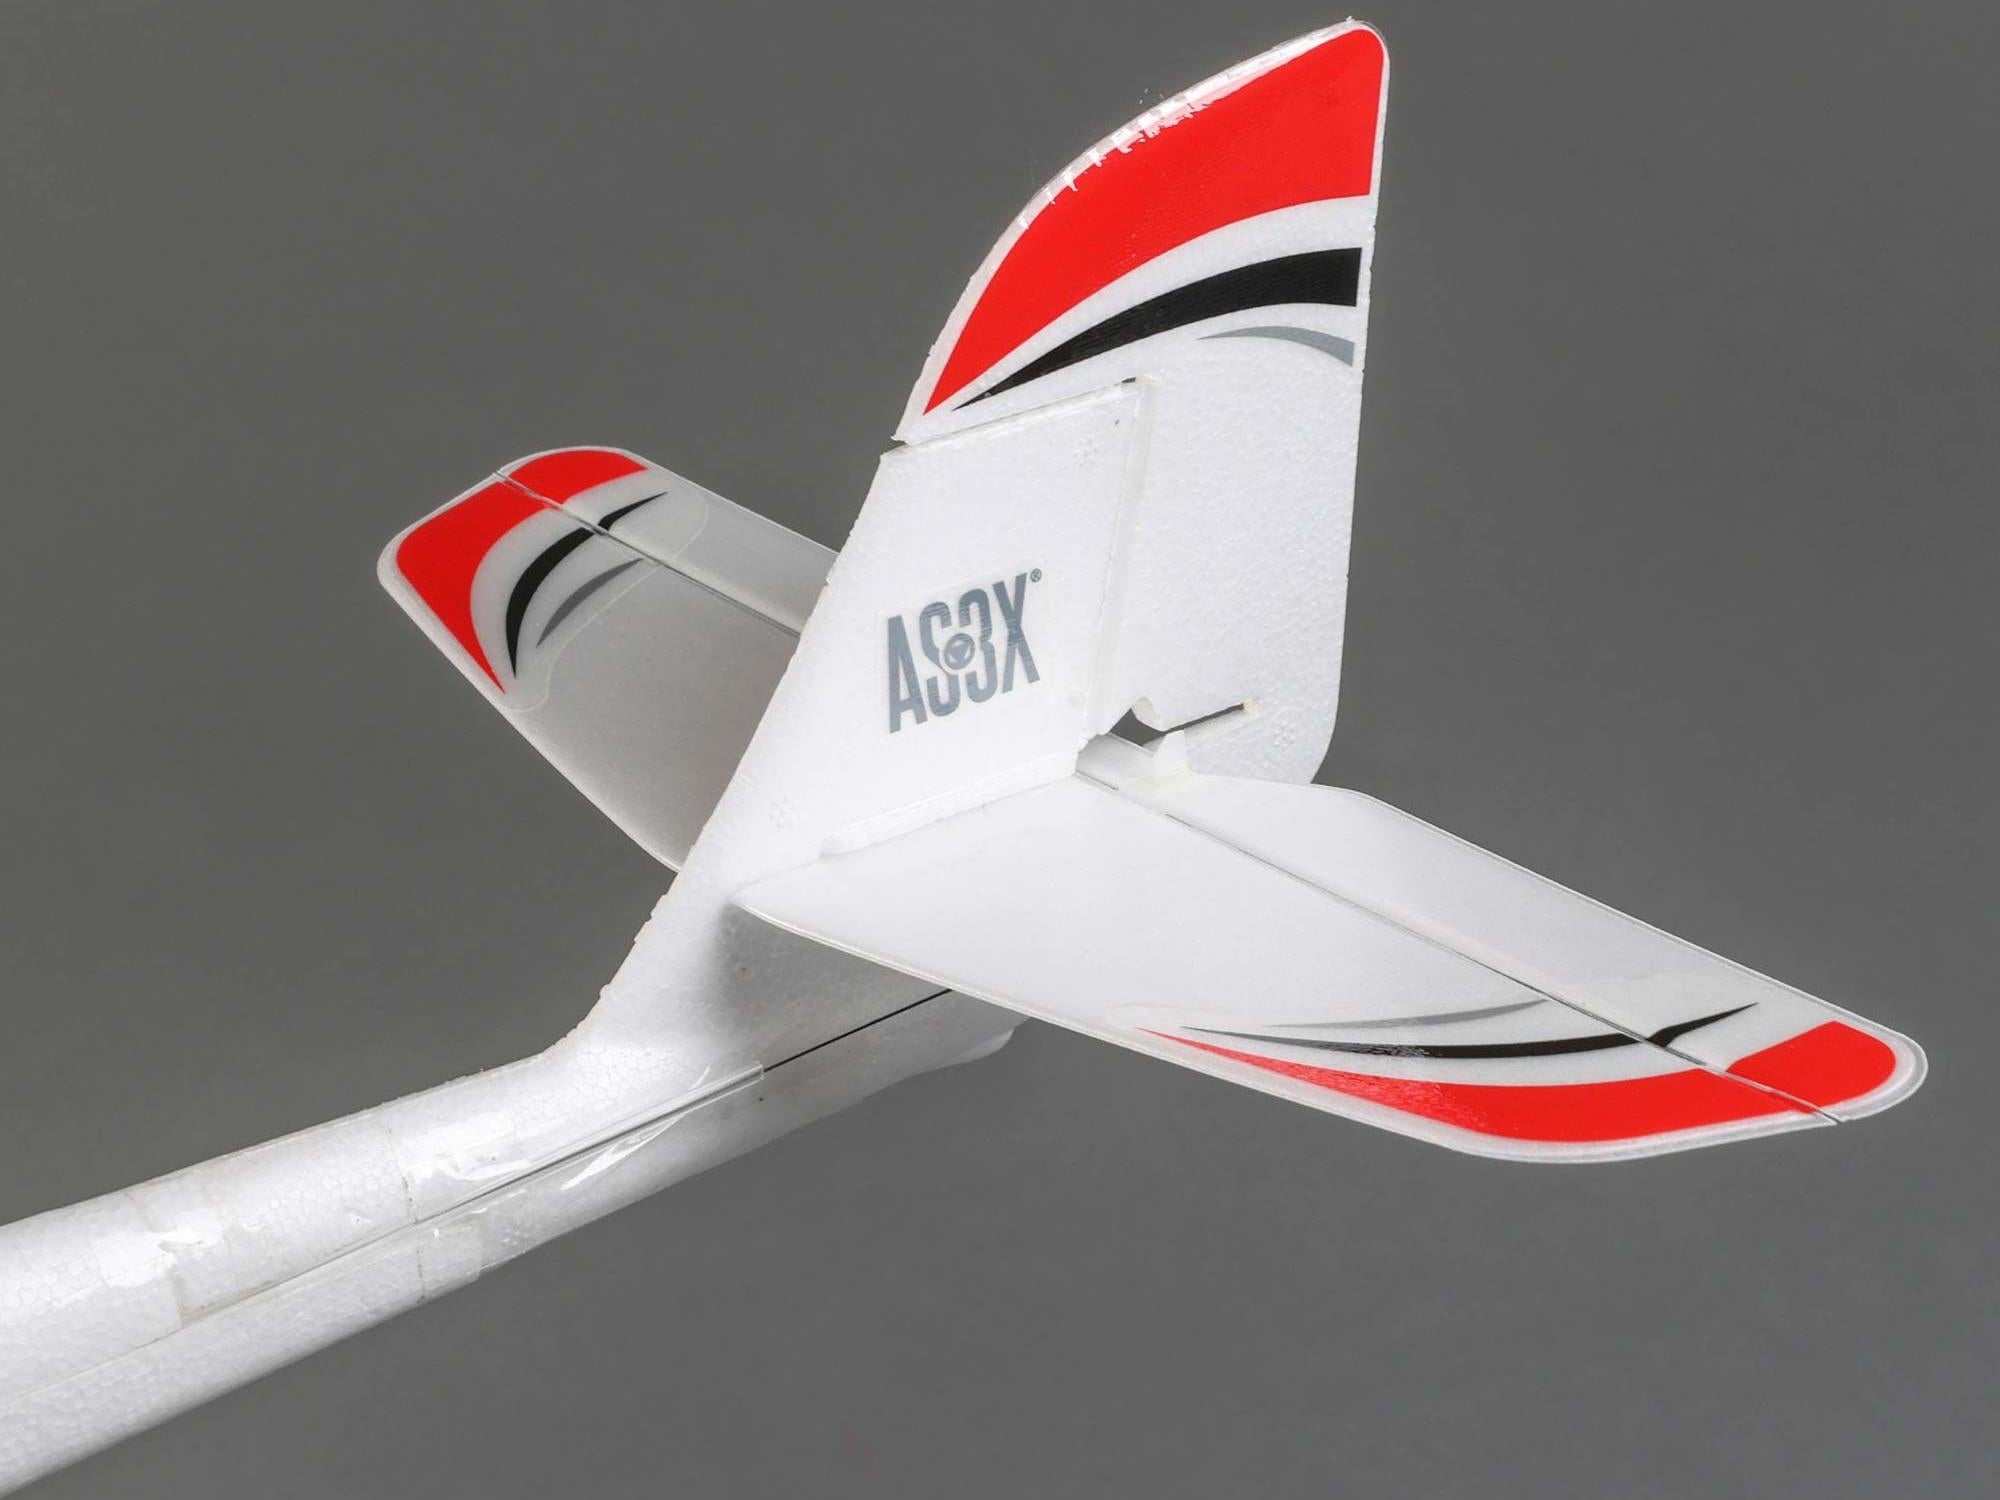 E-Flite UMX Radian BNF Basic with AS3X and SAFE Select EFLU2950